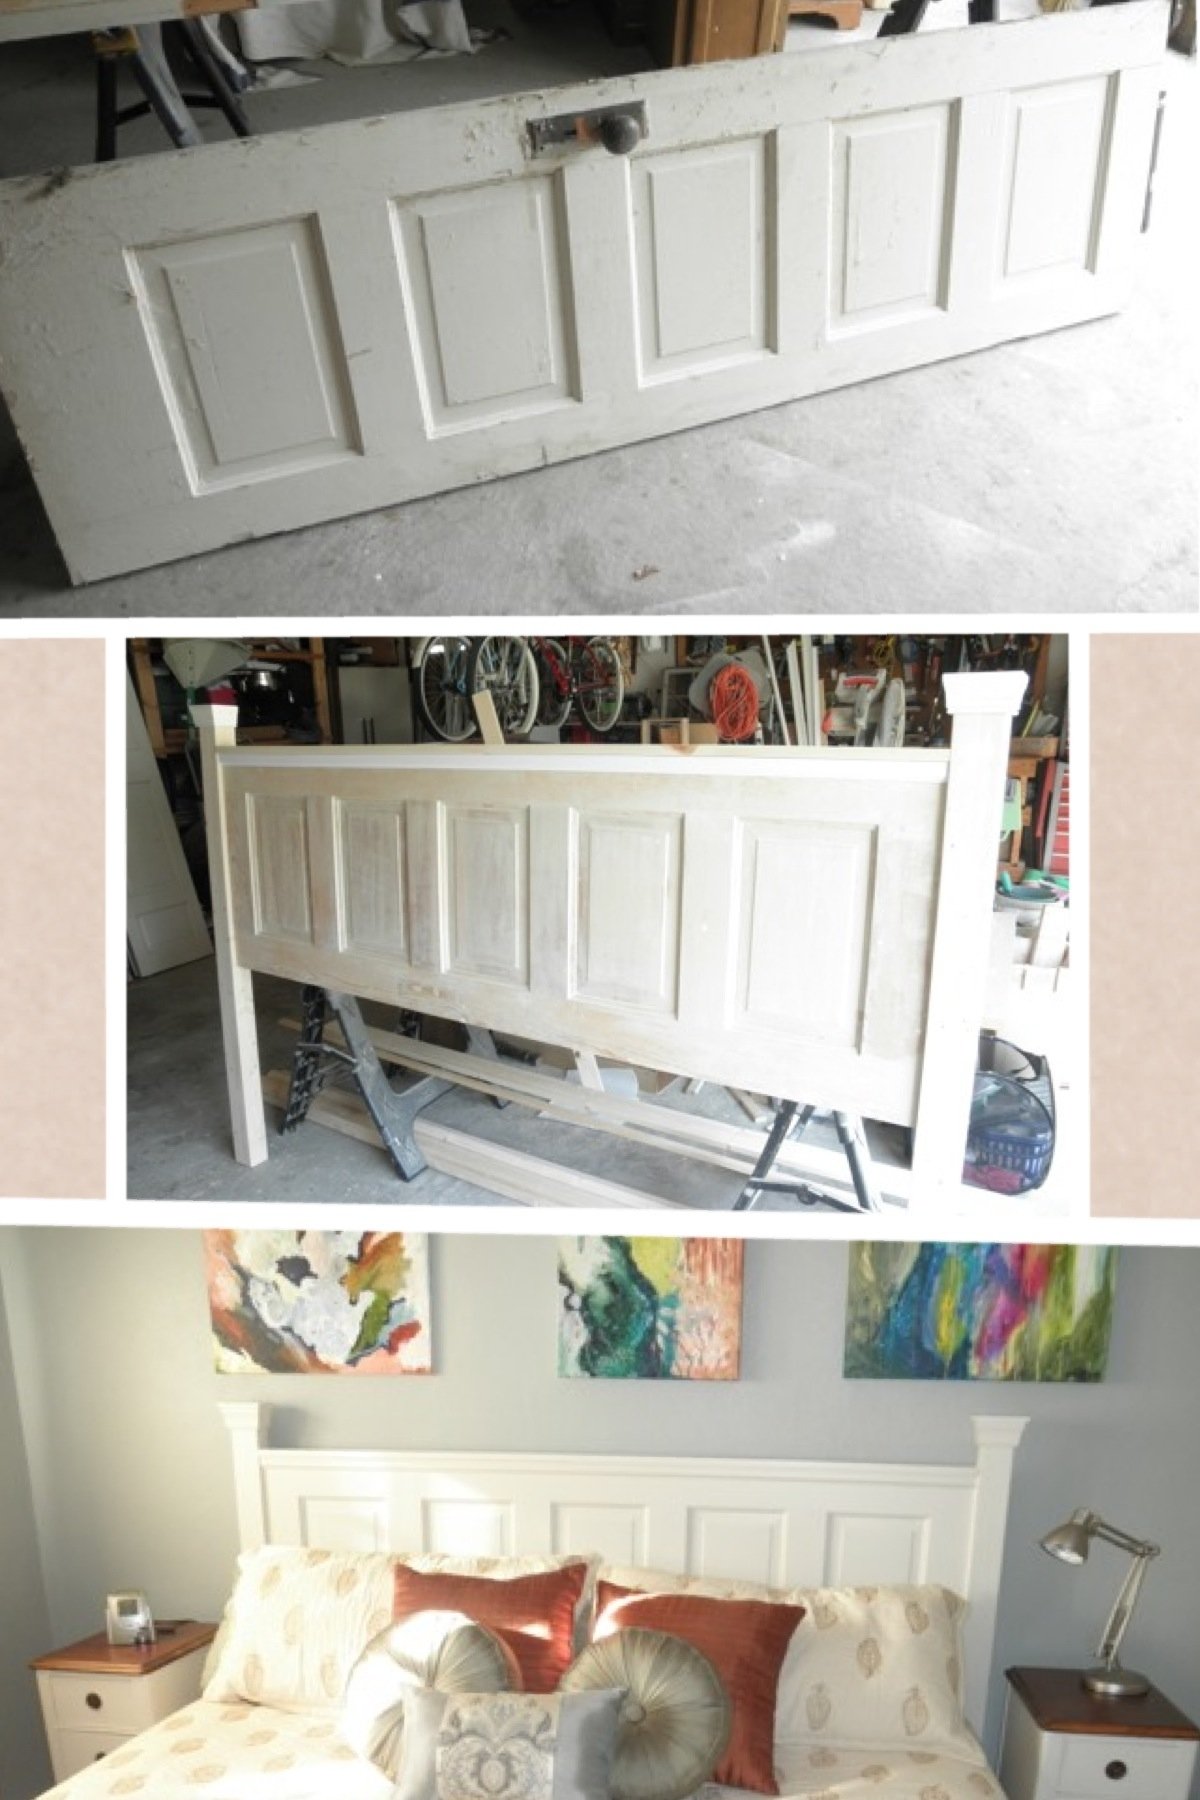 10 Elegant How To Make A King Size Headboard Ideas from old door to beautiful king sized headboard florida 1 2023